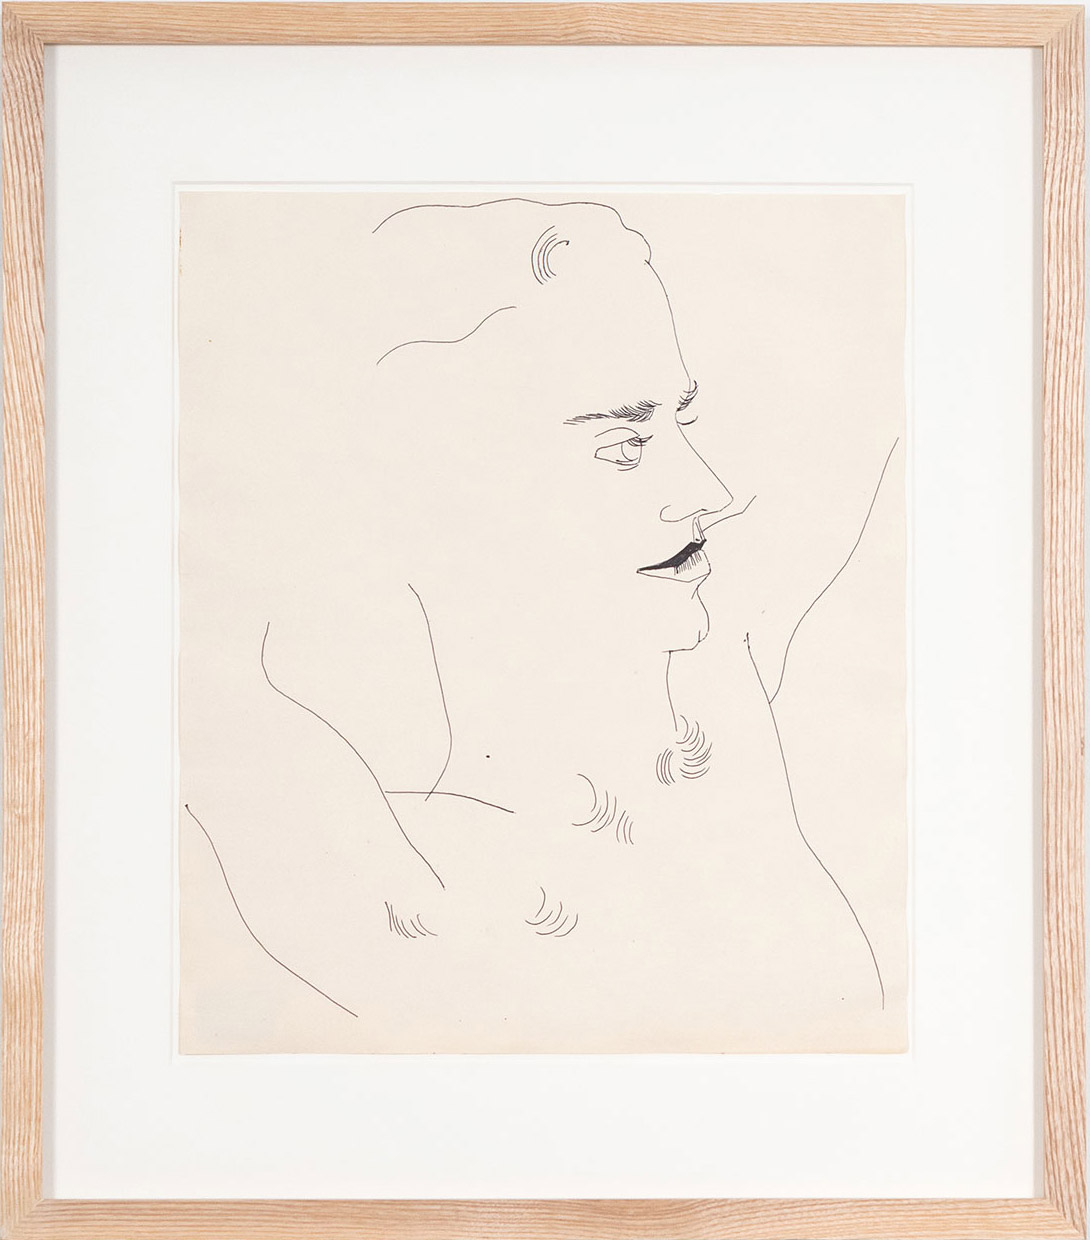  Andy Warhol,  Portrait of a Man (George) , circa 1950s. Black ballpoint pen on manila paper, 16.25 x13.75 inches ©The Andy Warhol Foundation for the Visual Arts, Inc. 